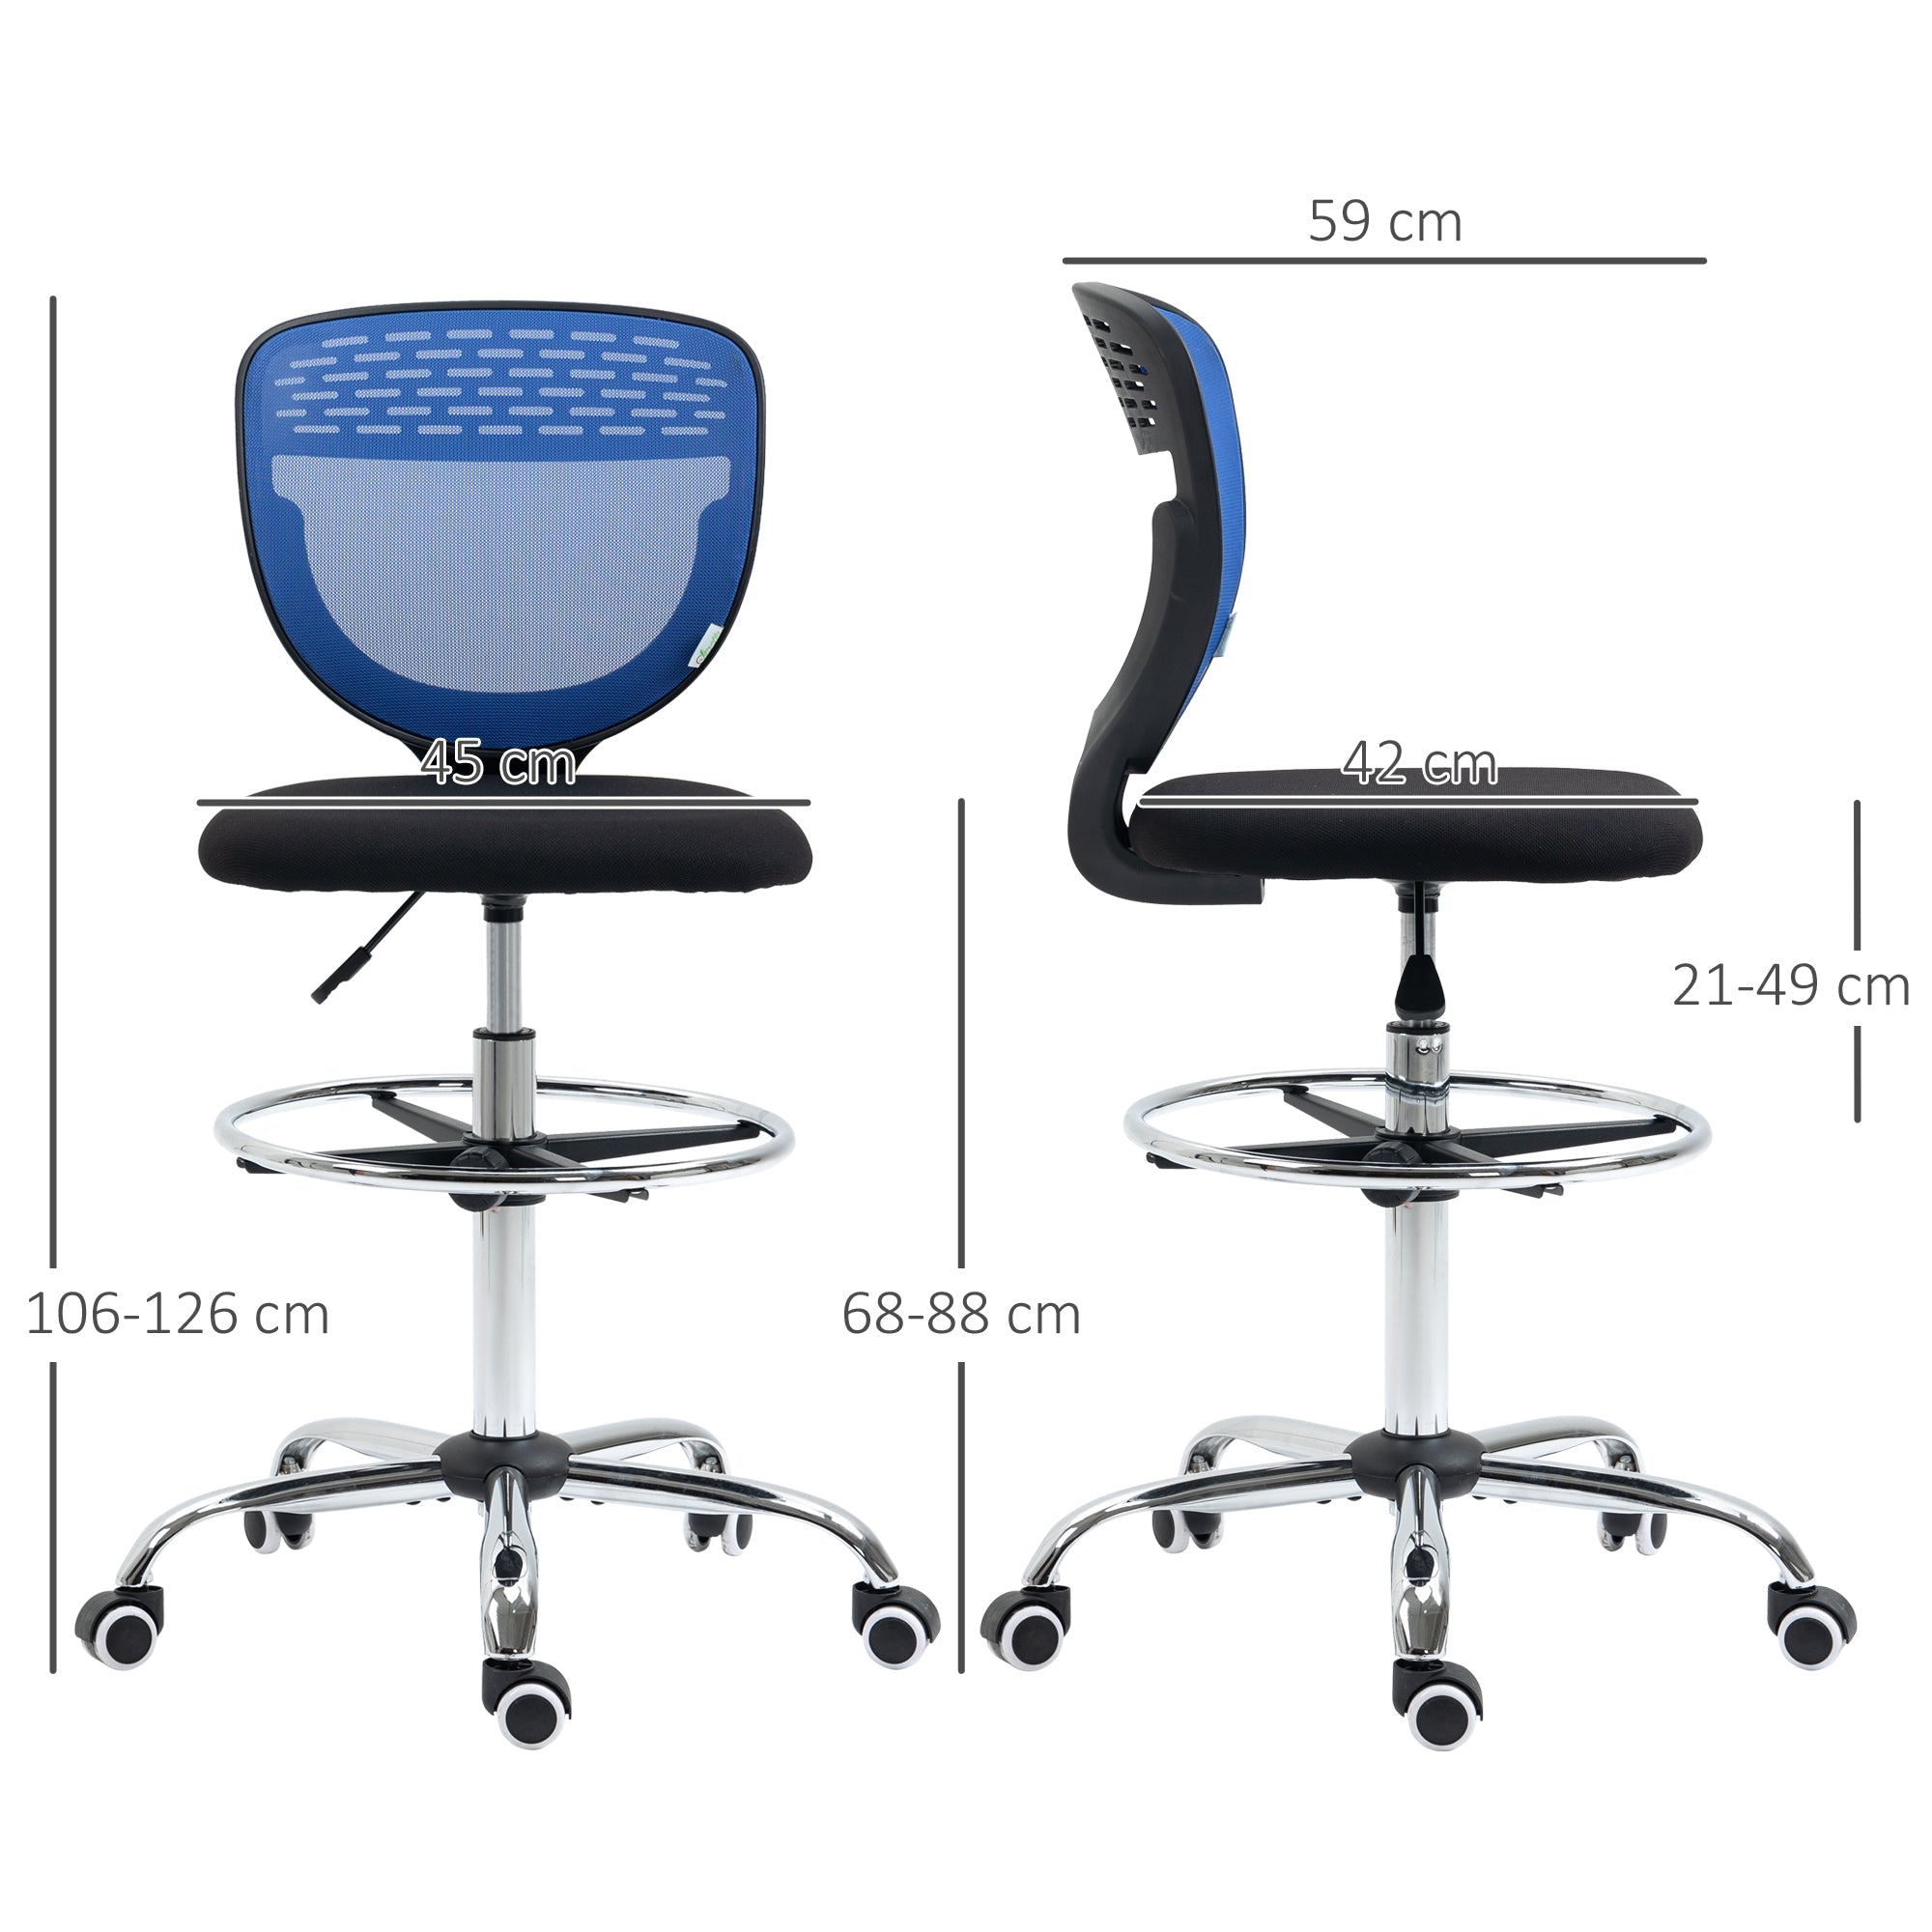 Drafting Chair, Swivel Office Draughtsman Chair, Mesh Standing Desk Chair with Lumbar Support, Adjustable Foot Ring, Armless, Dark Blue-2